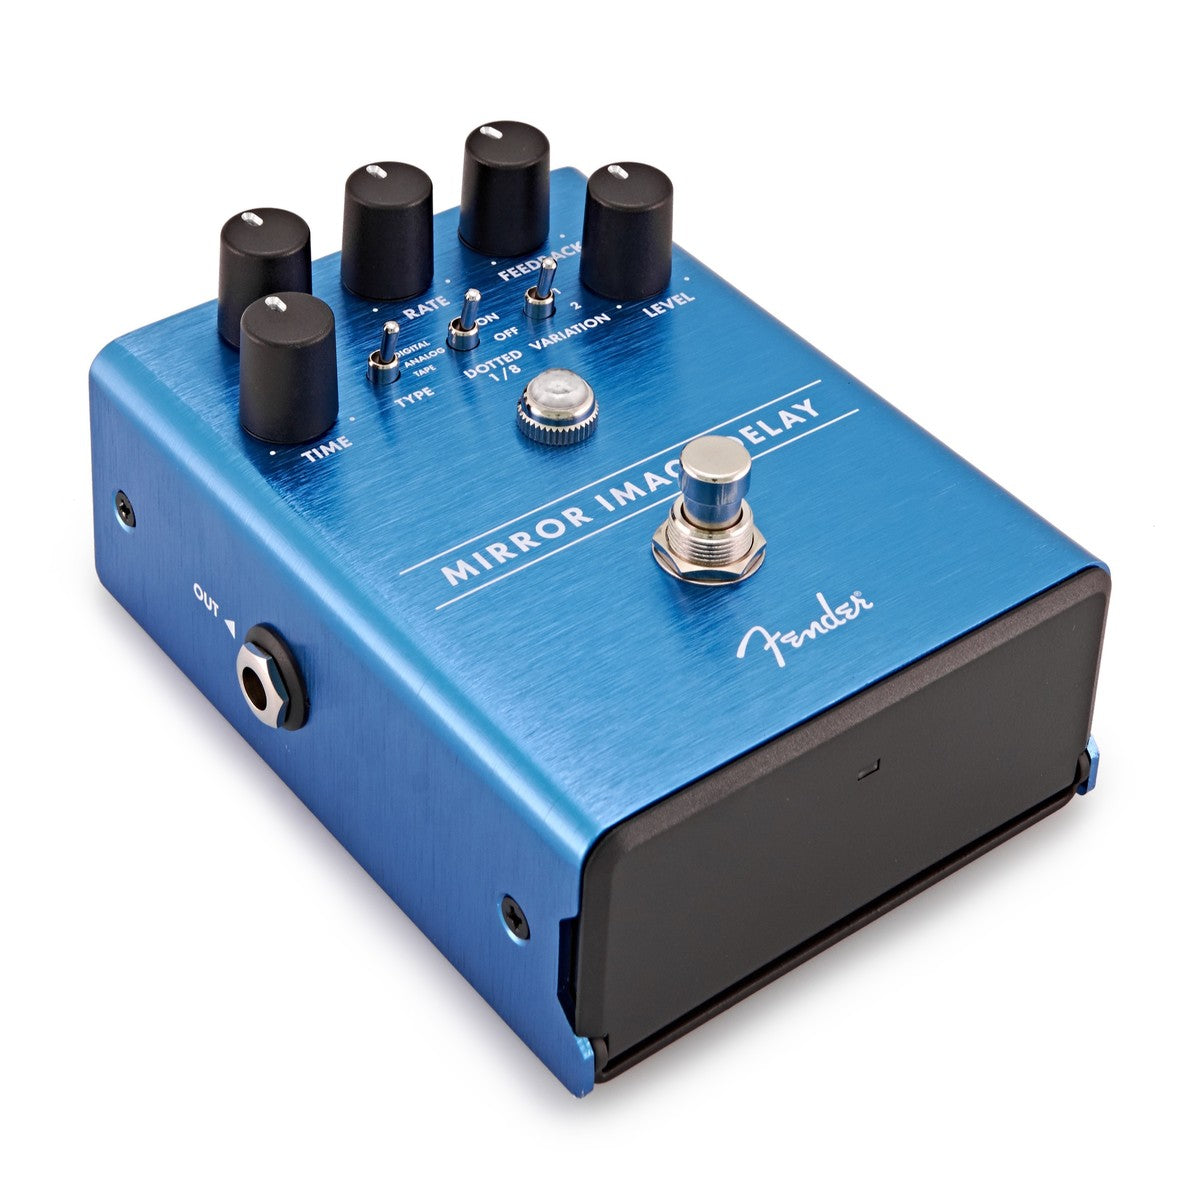 Pedal Guitar Fender Mirror Image Delay - Việt Music